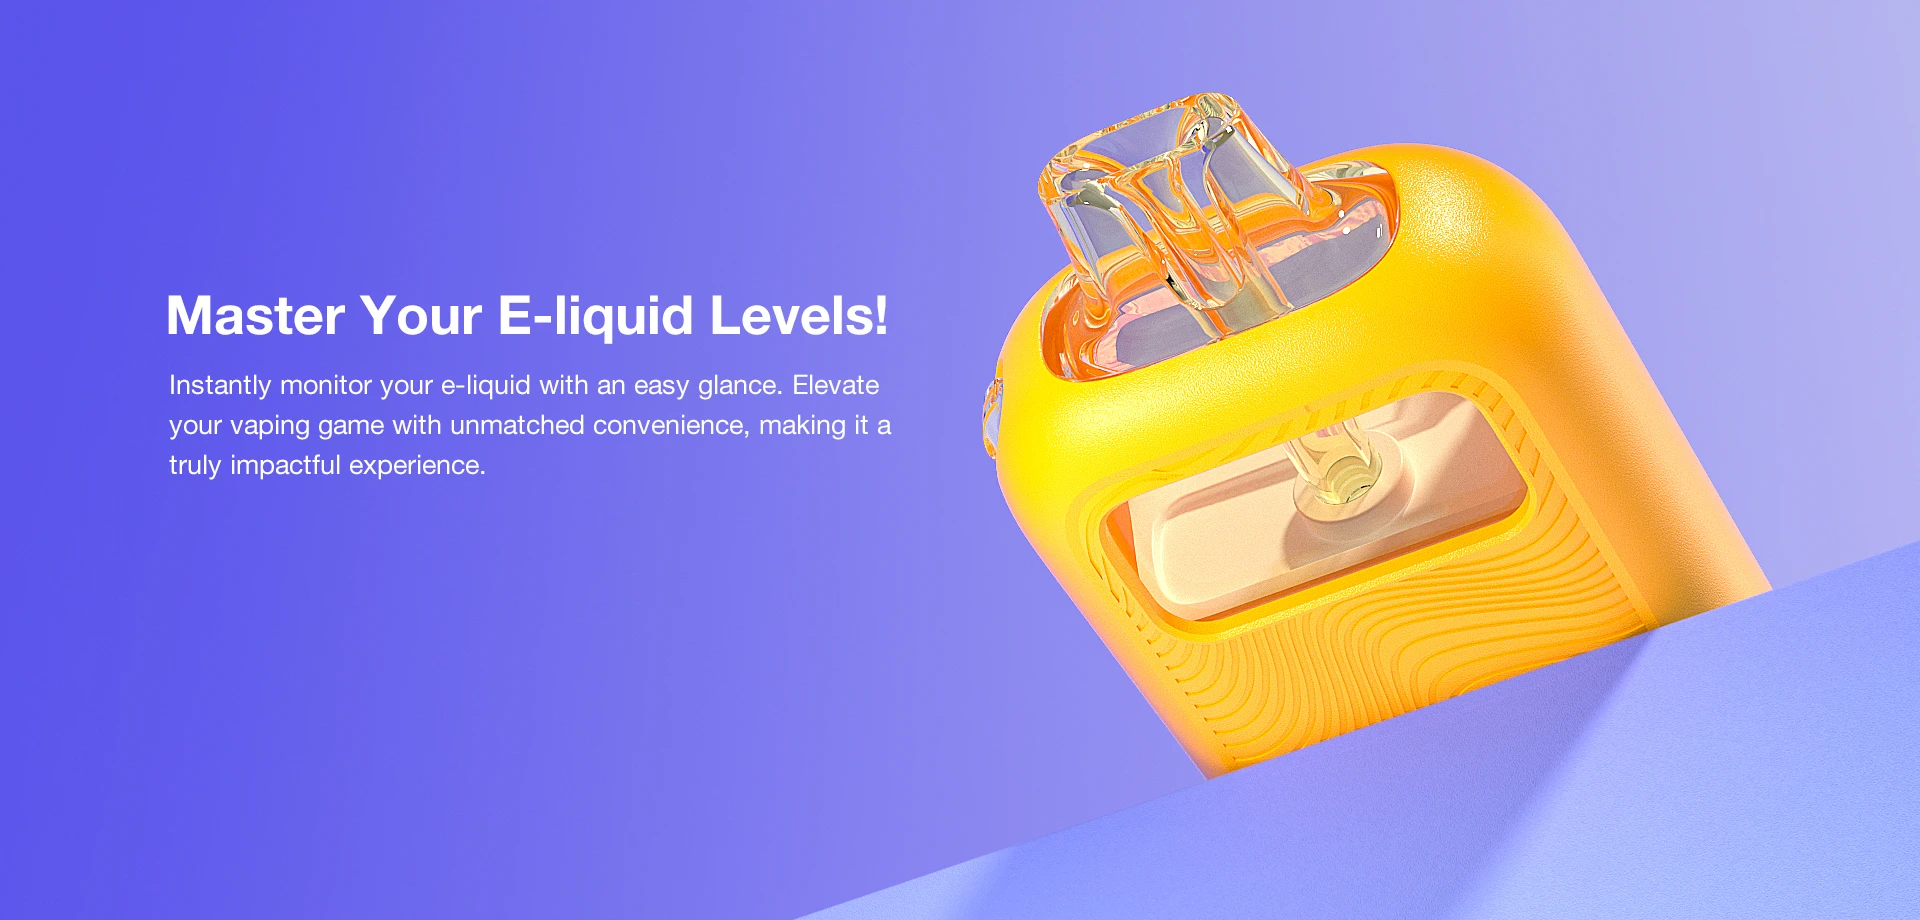 Master Your E-liquid Levels! Instantly monitor your e-liquid with an easy glance. Elevate your vaping game with unmatched convenience, making it a truly impactful experience.